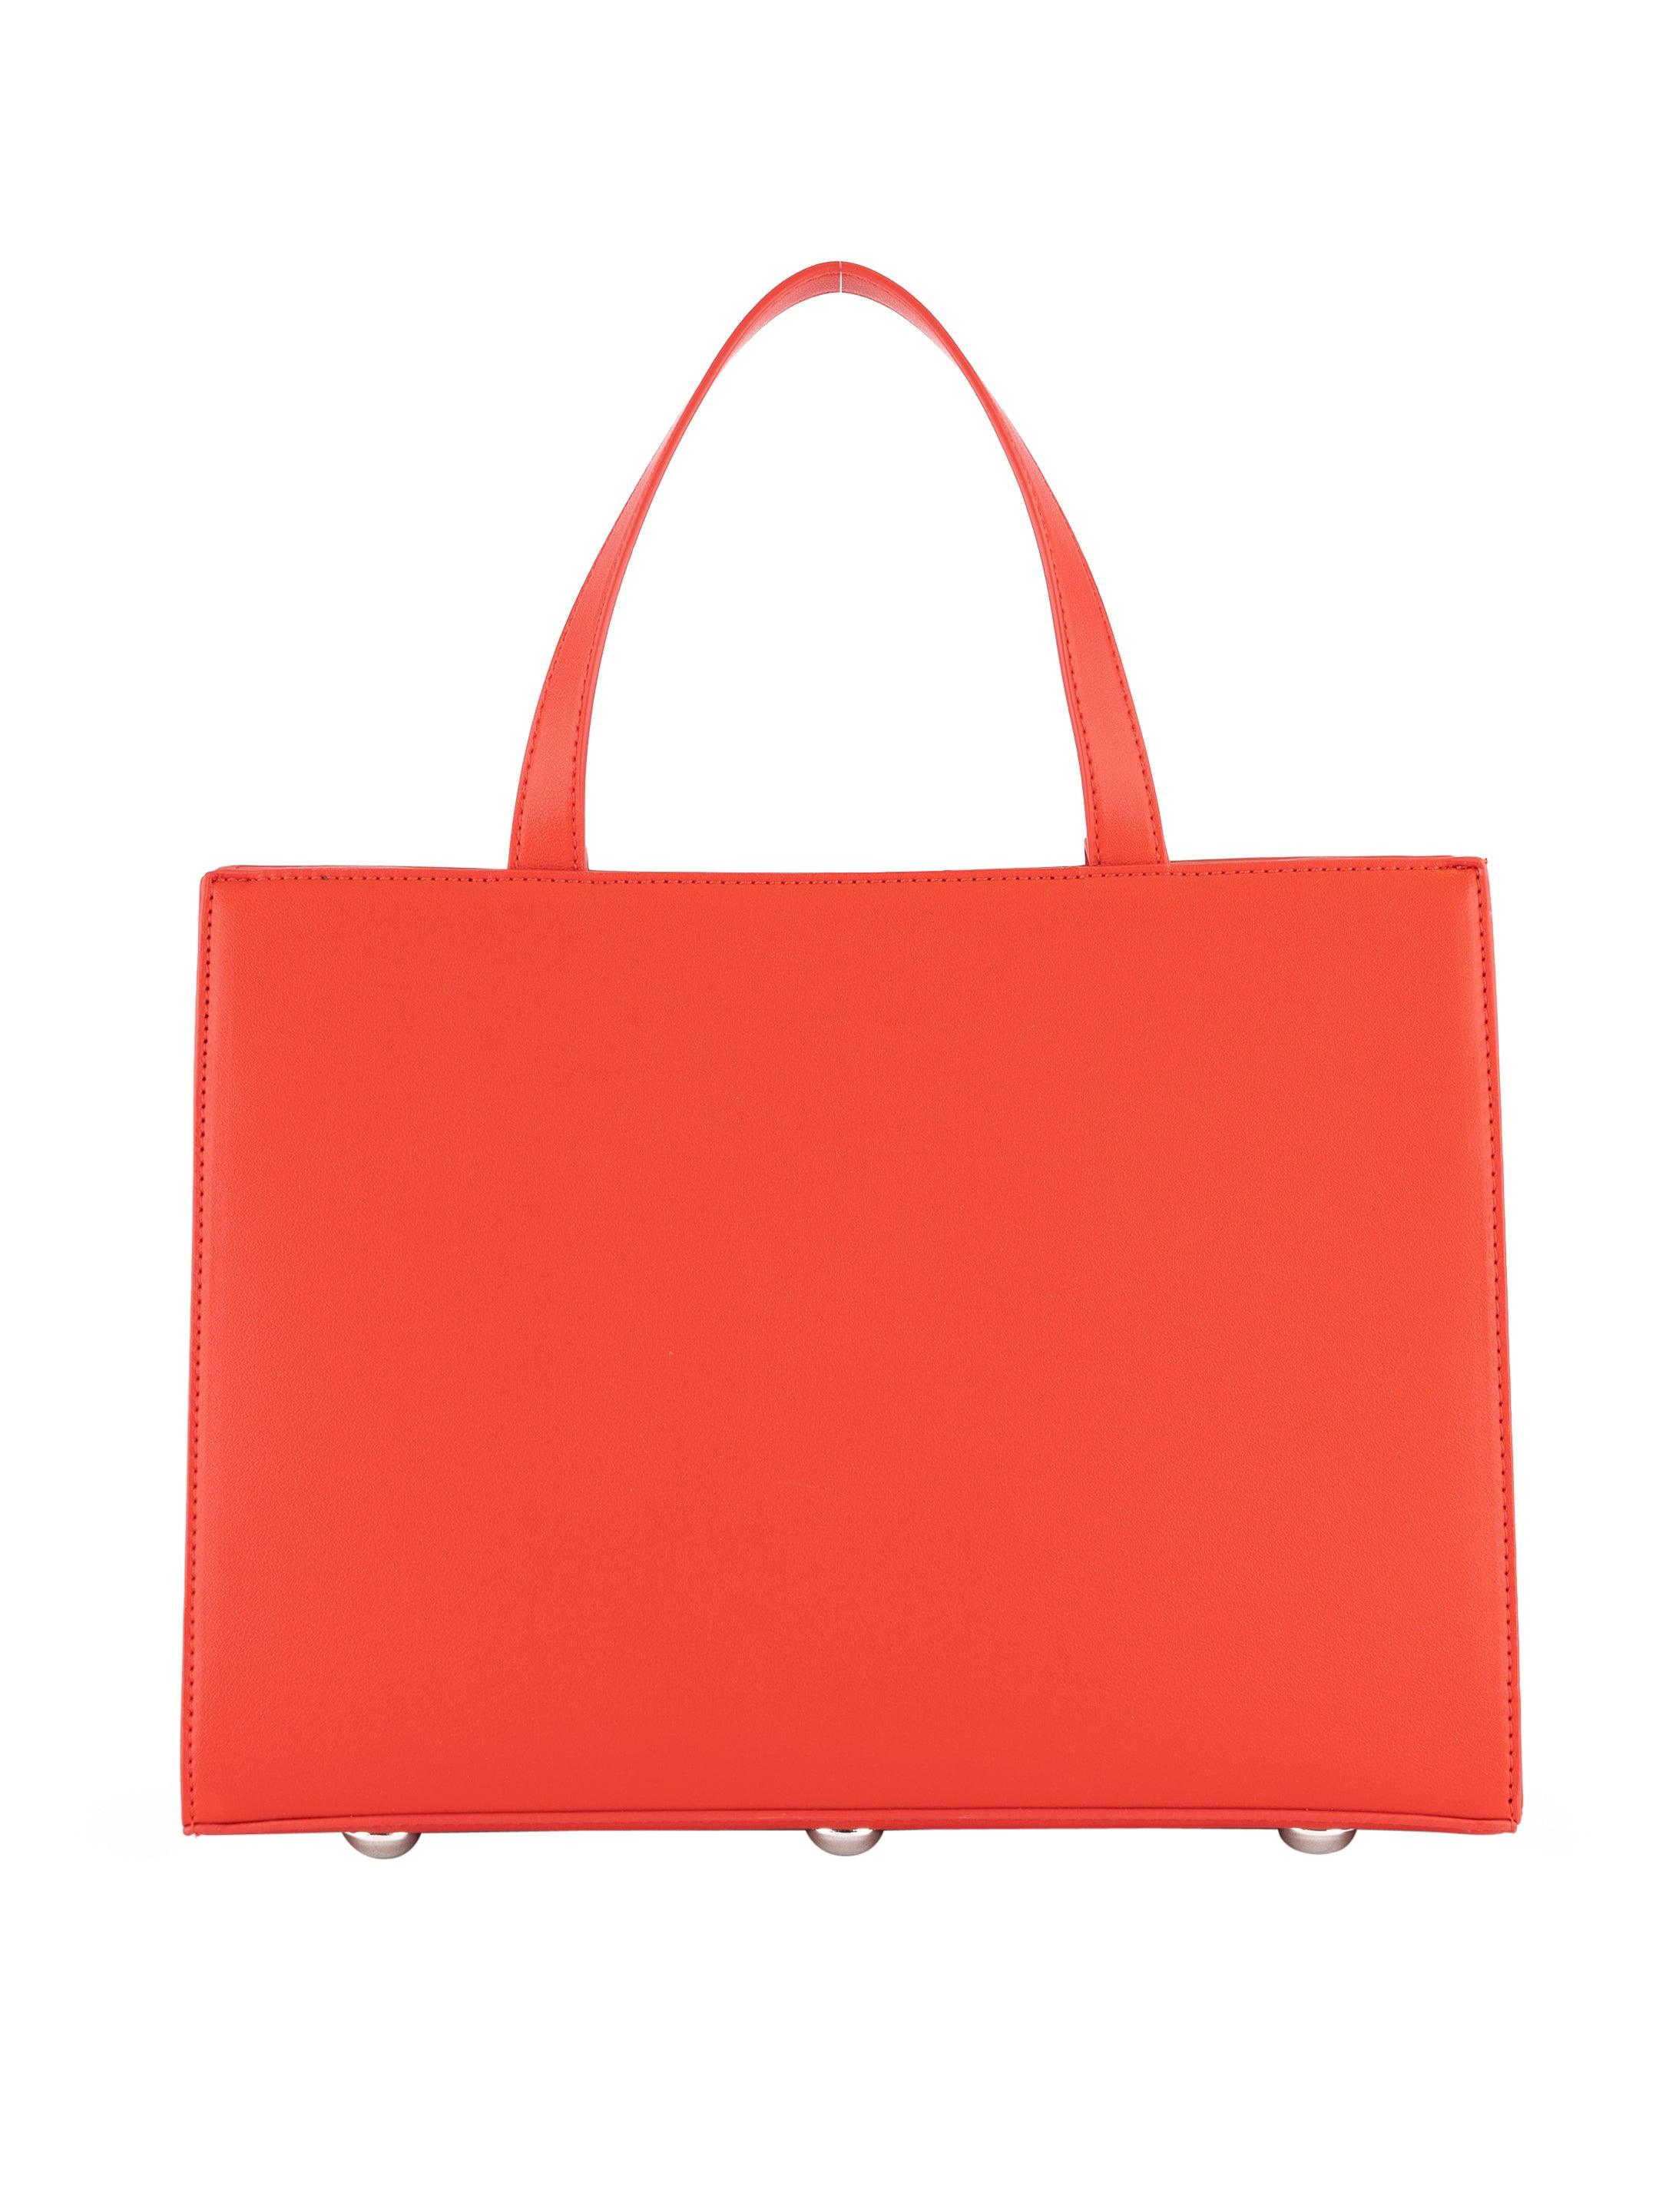 PBP Red Leather Bag